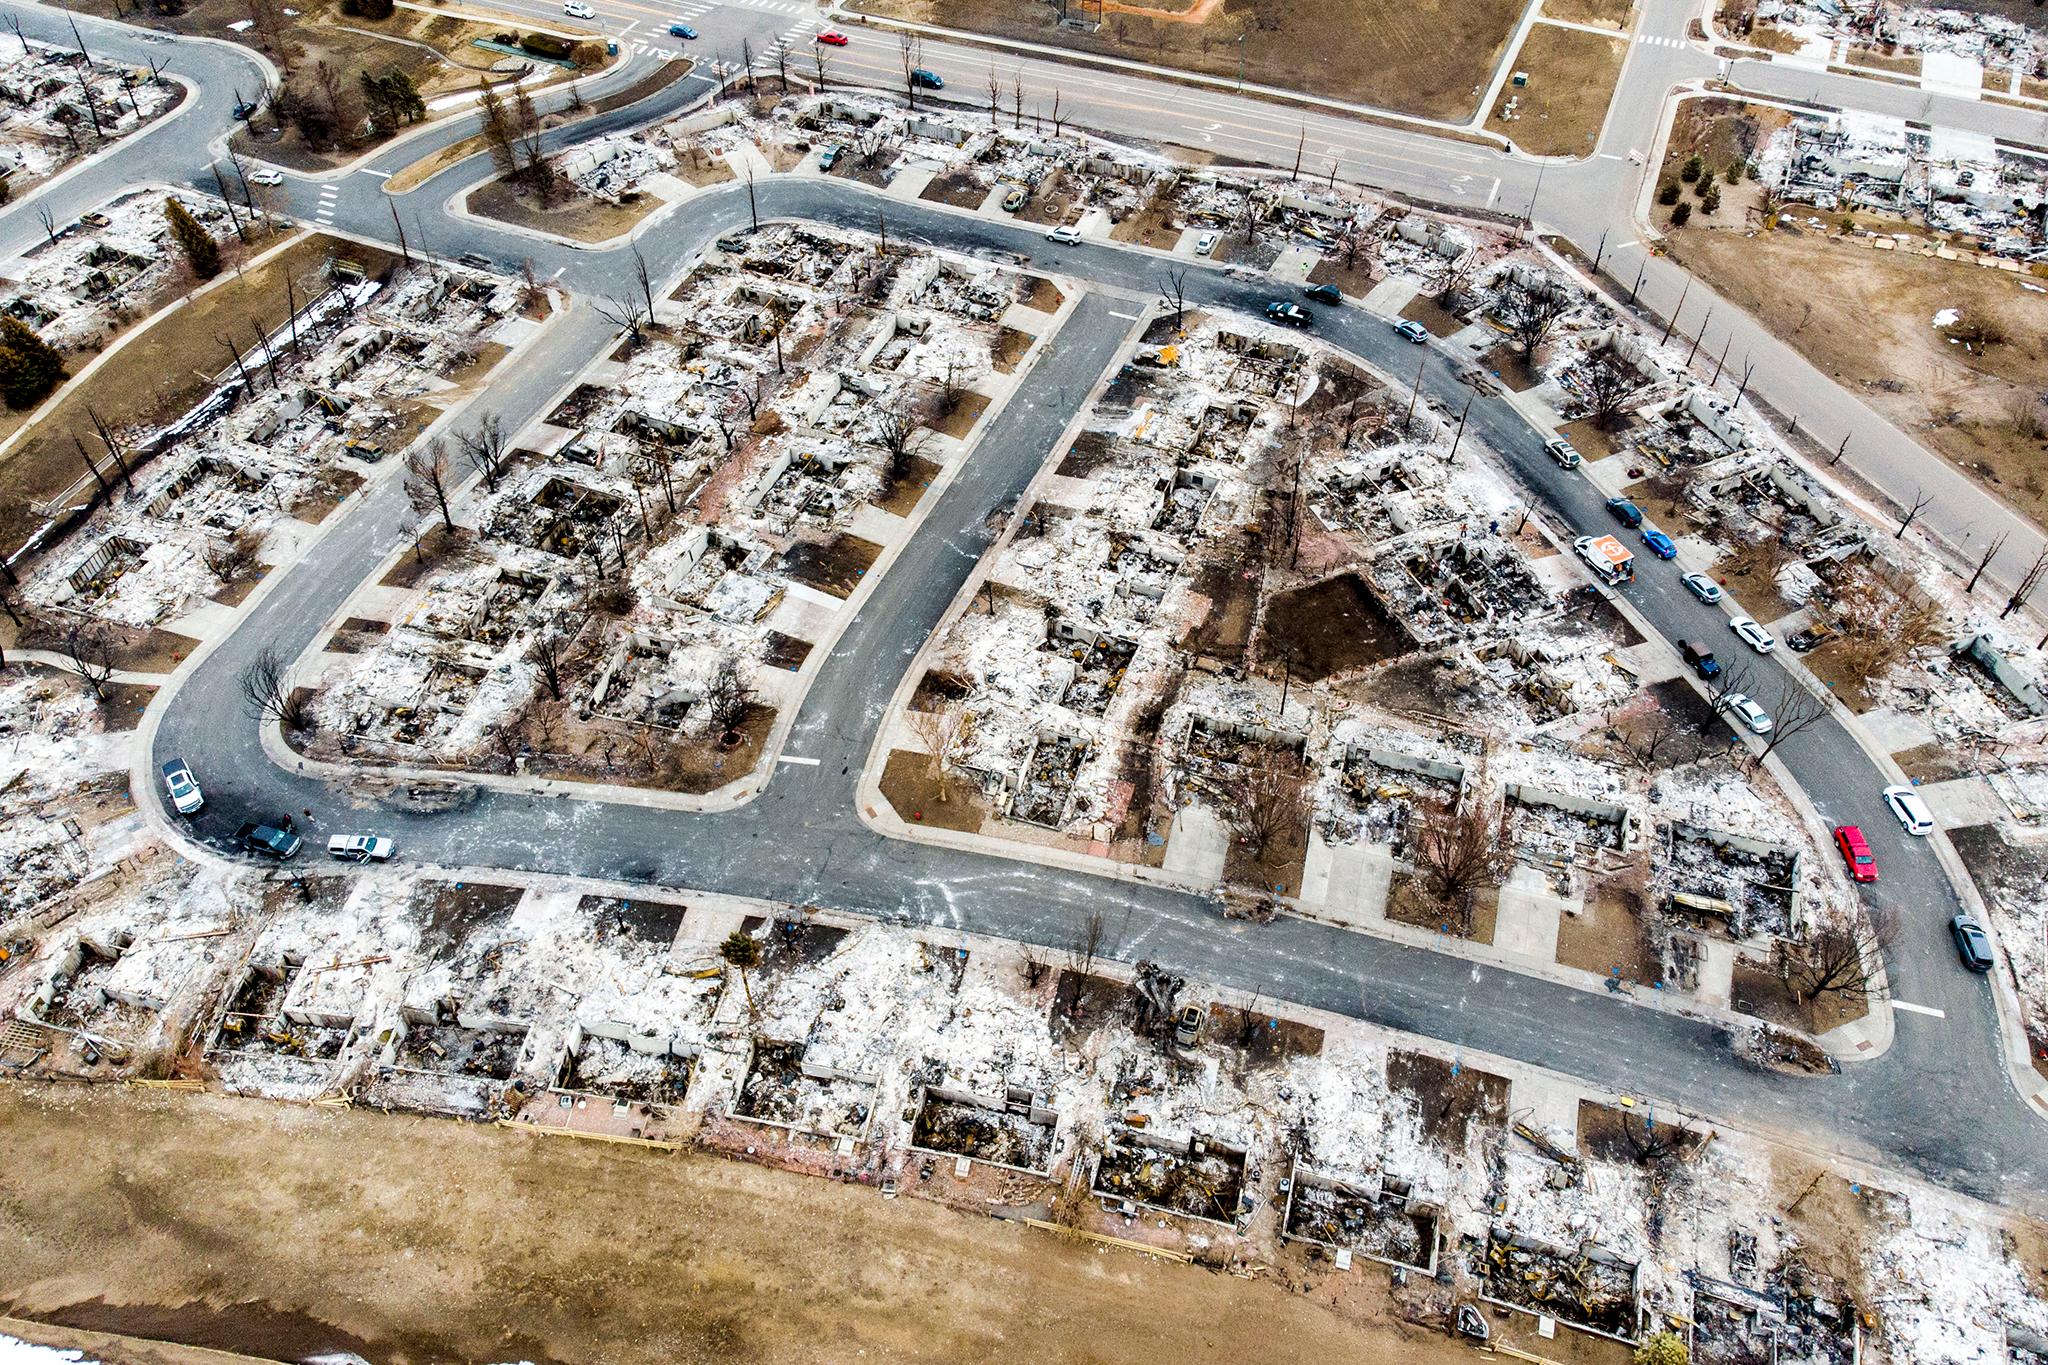 The aftermath of the Marshal fire in Superior. Jan. 18, 2022.